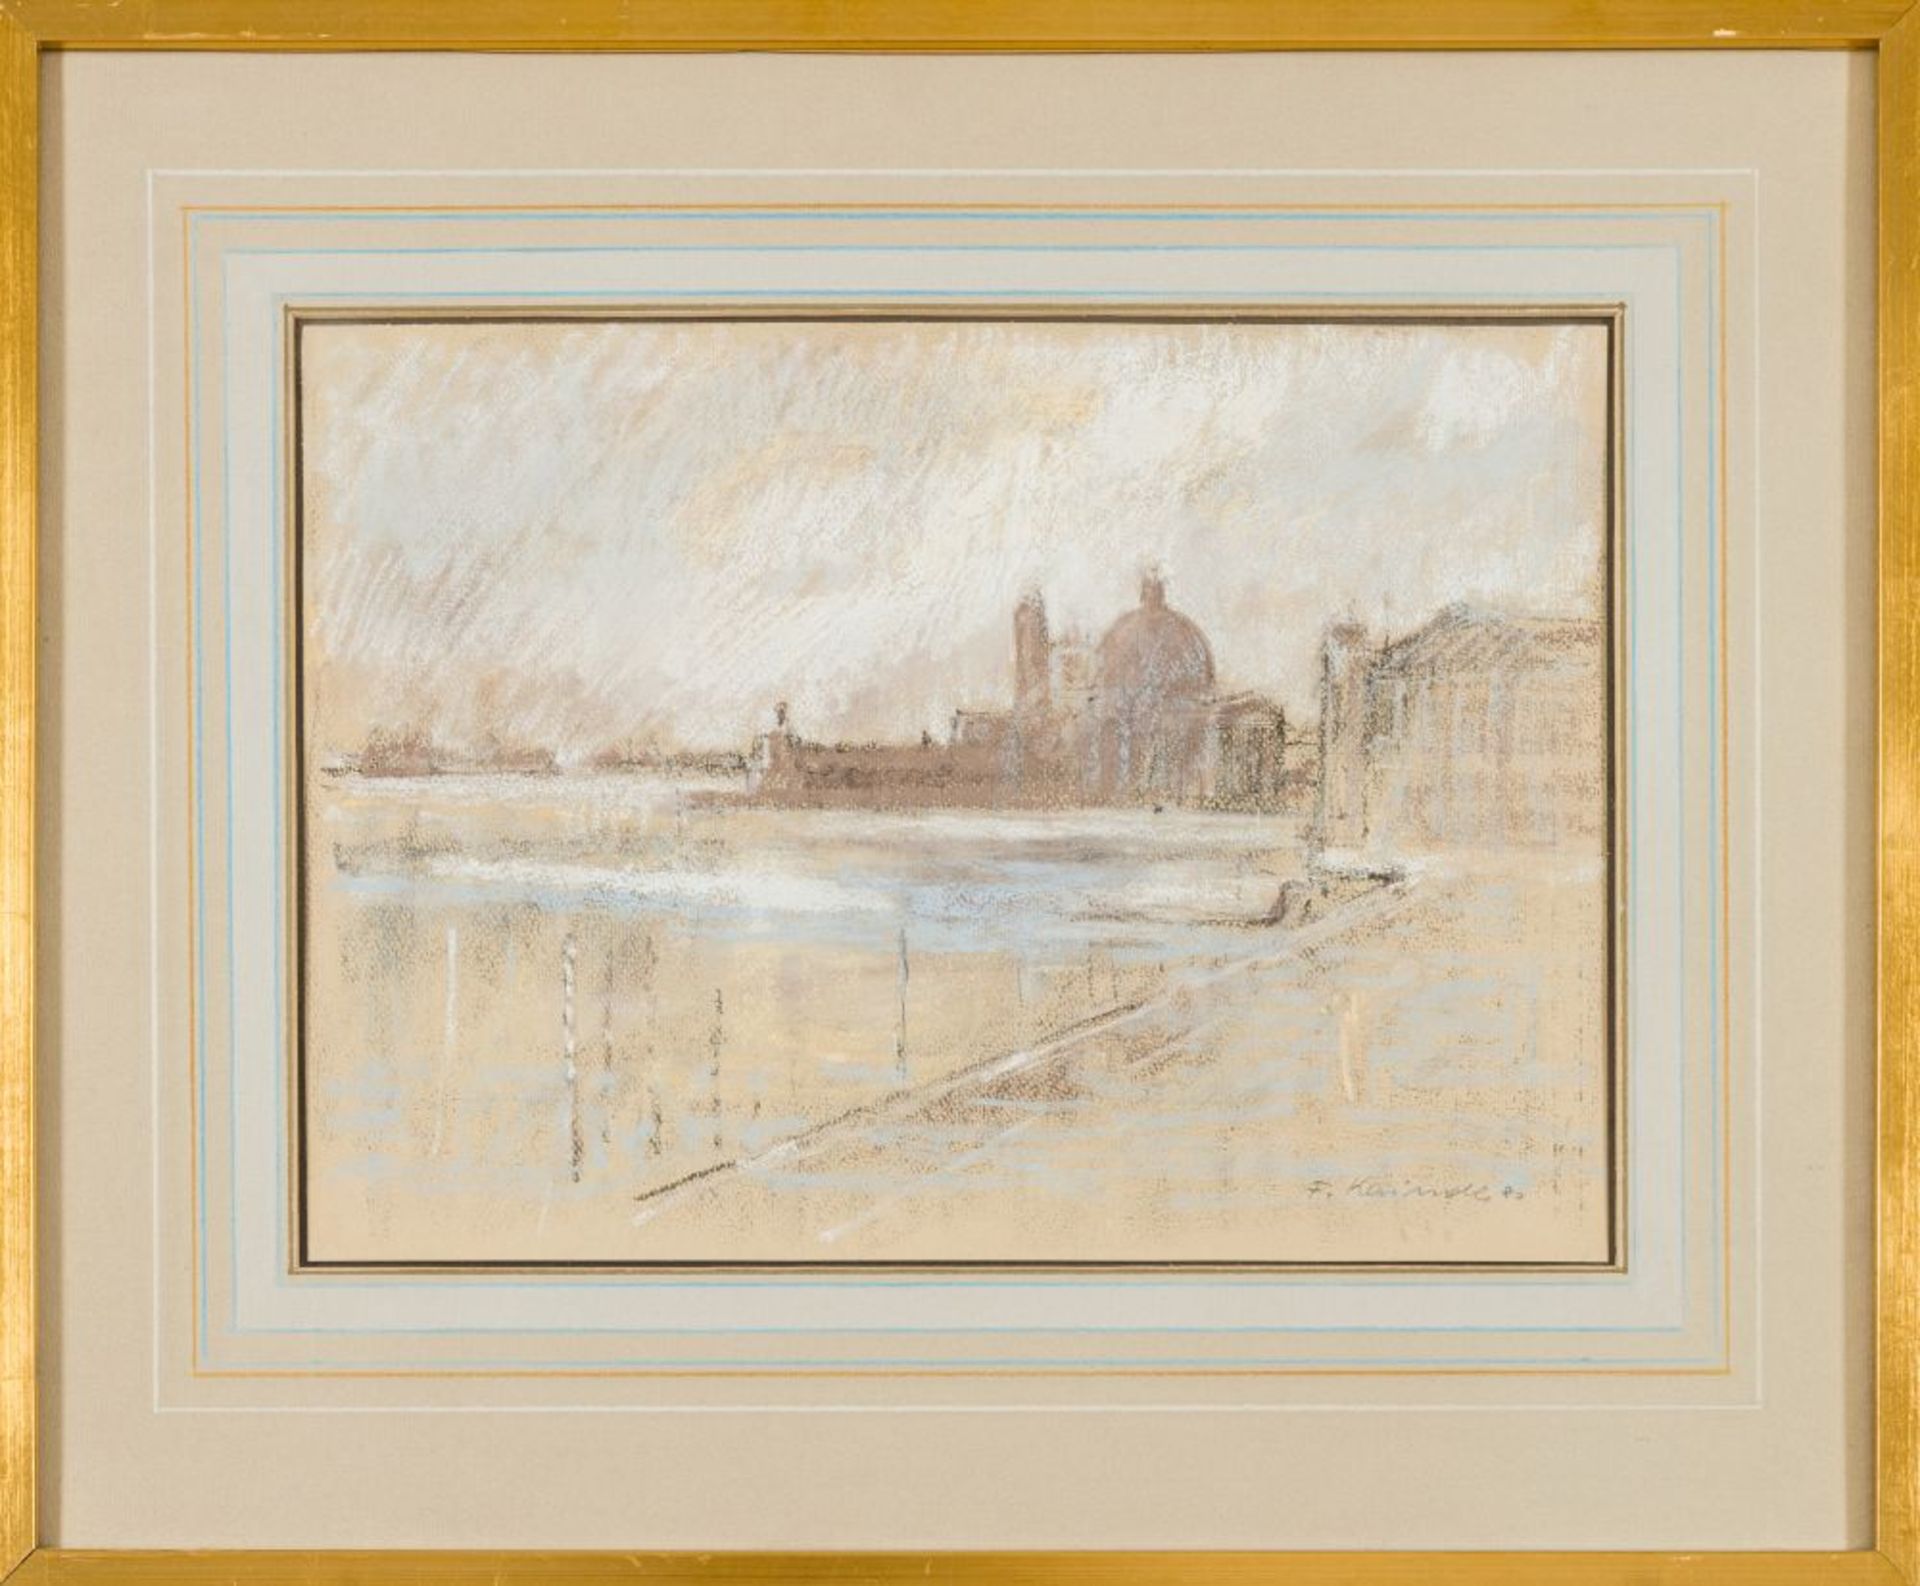 View on Venice, (19)81 Soft Pastels on Paper Signed and dated lower right Sheet Dimensions: 12 x - Image 2 of 3